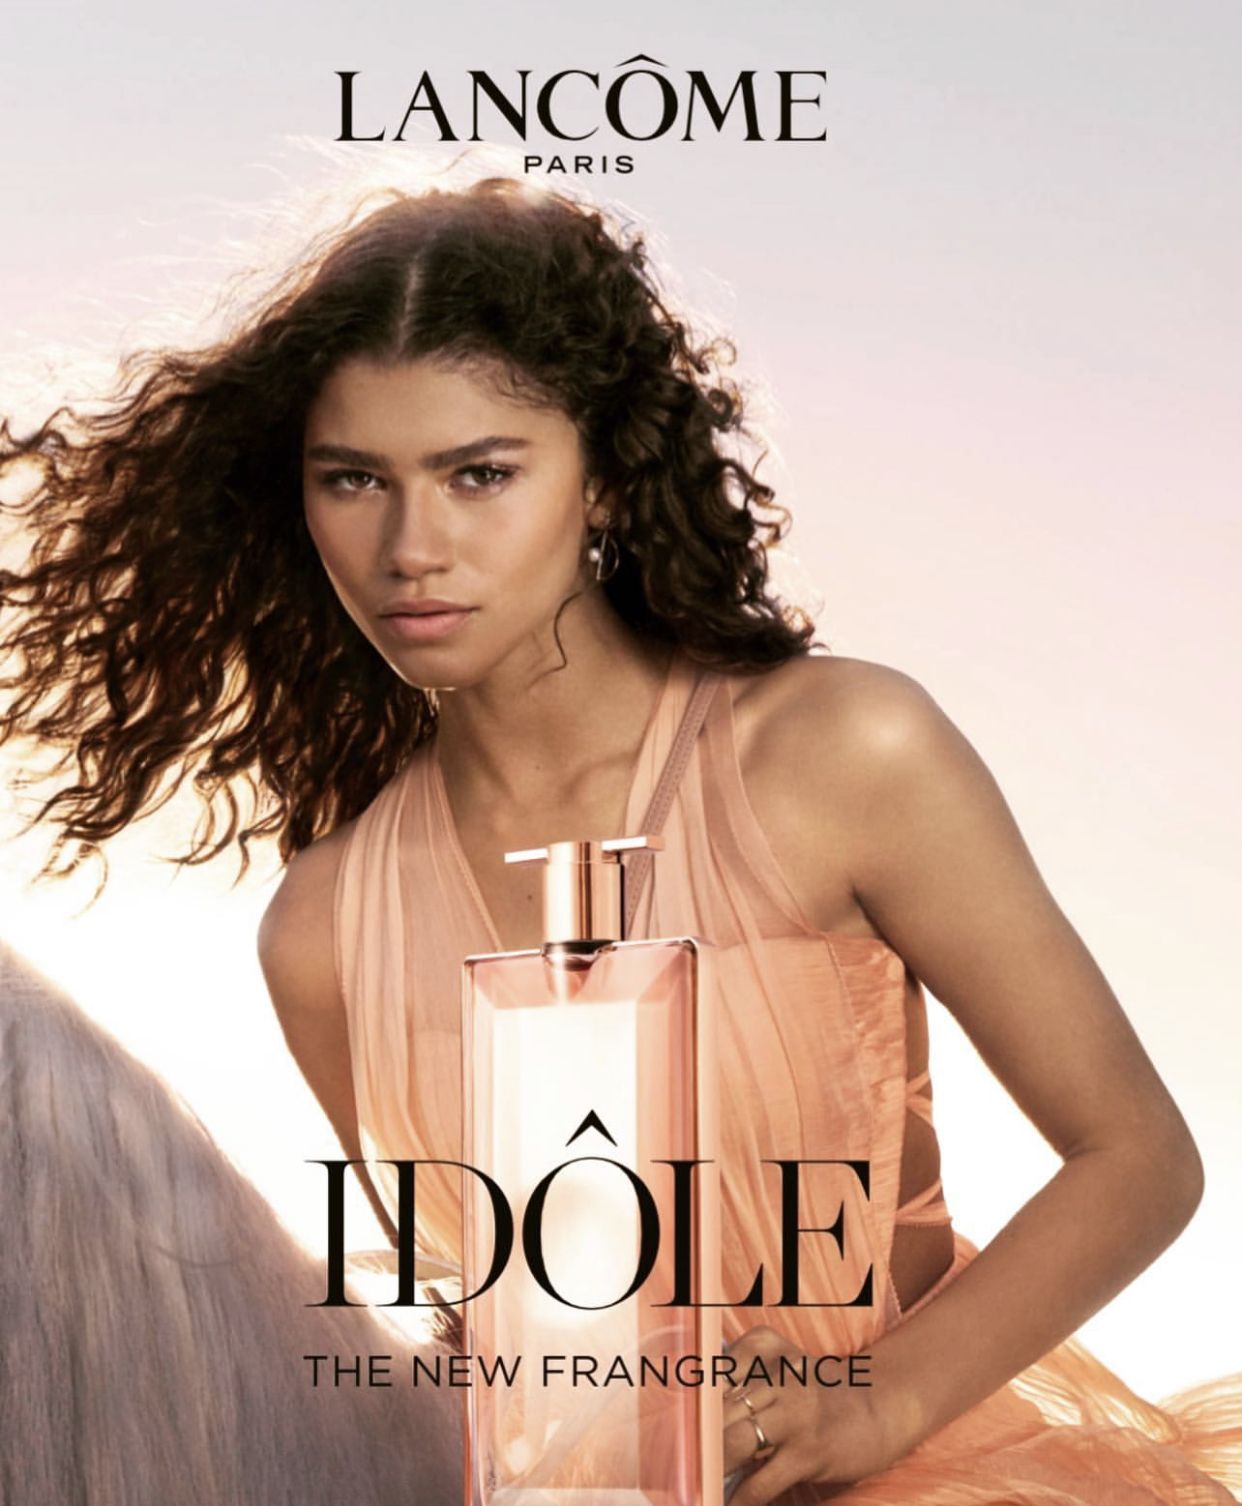 Come Celebrate Lanc?me's “Id?le” Fragrance With Zendaya At Macy's Herald Square! - Come Celebrate Lanc?me's “Id?le” Fragrance With Zendaya At Macy's Herald Square! -   18 style Icons zendaya ideas